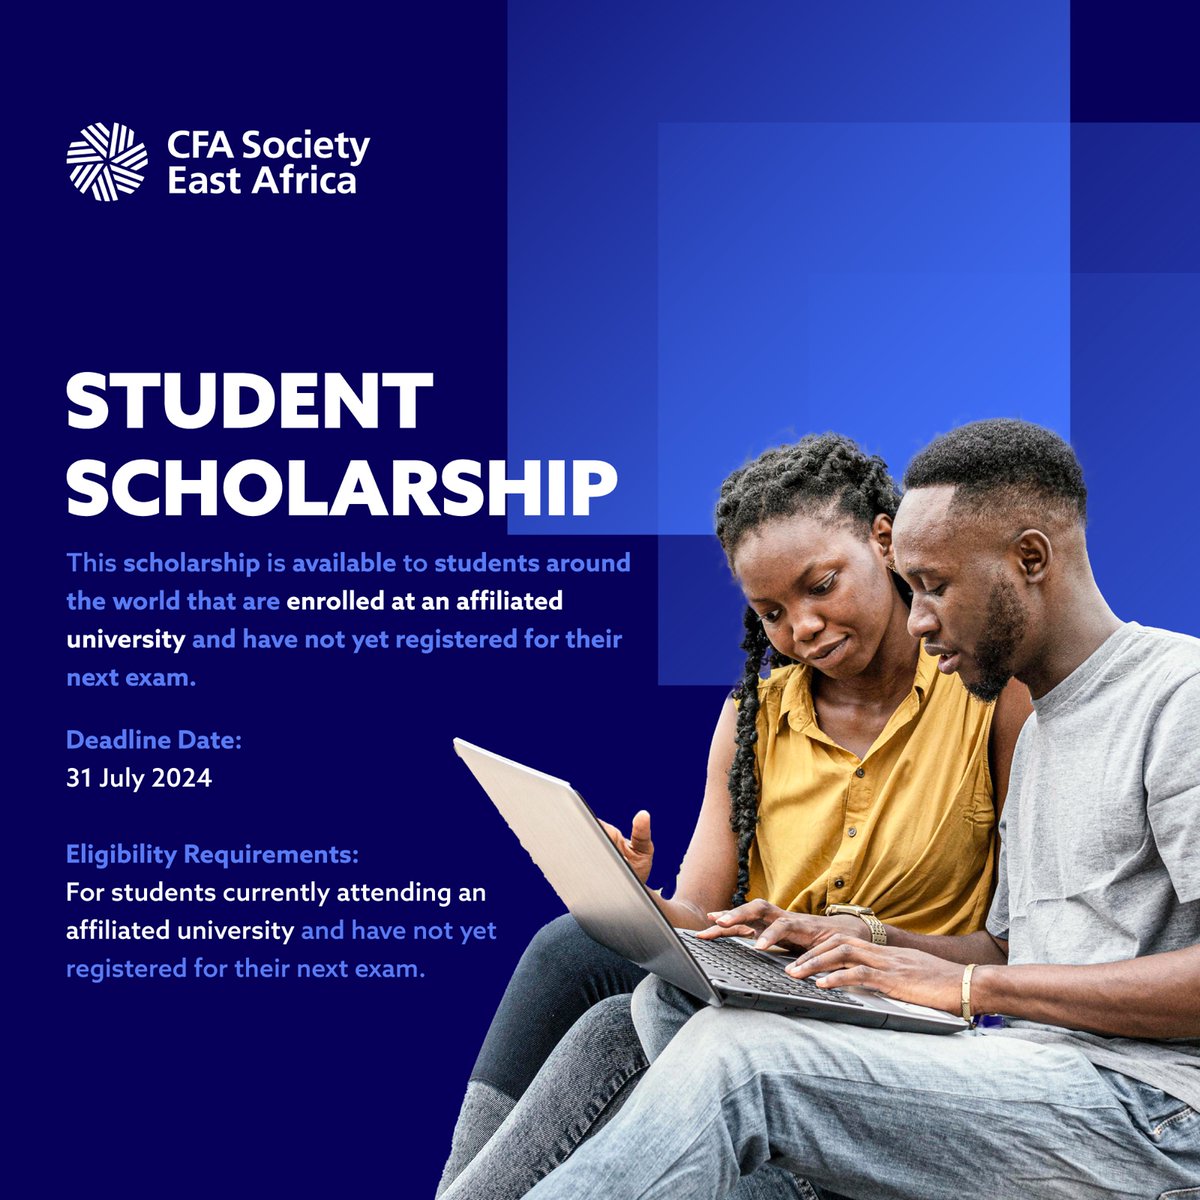 🚨 Attention students! Don't miss out on the opportunity to apply for the CFA Student Scholarship before the deadline on July 31, 2024. Visit cfainstitute.org/en/programs/cf… for more details and to apply now! #CFAStudentScholarship #CFASocietyEA